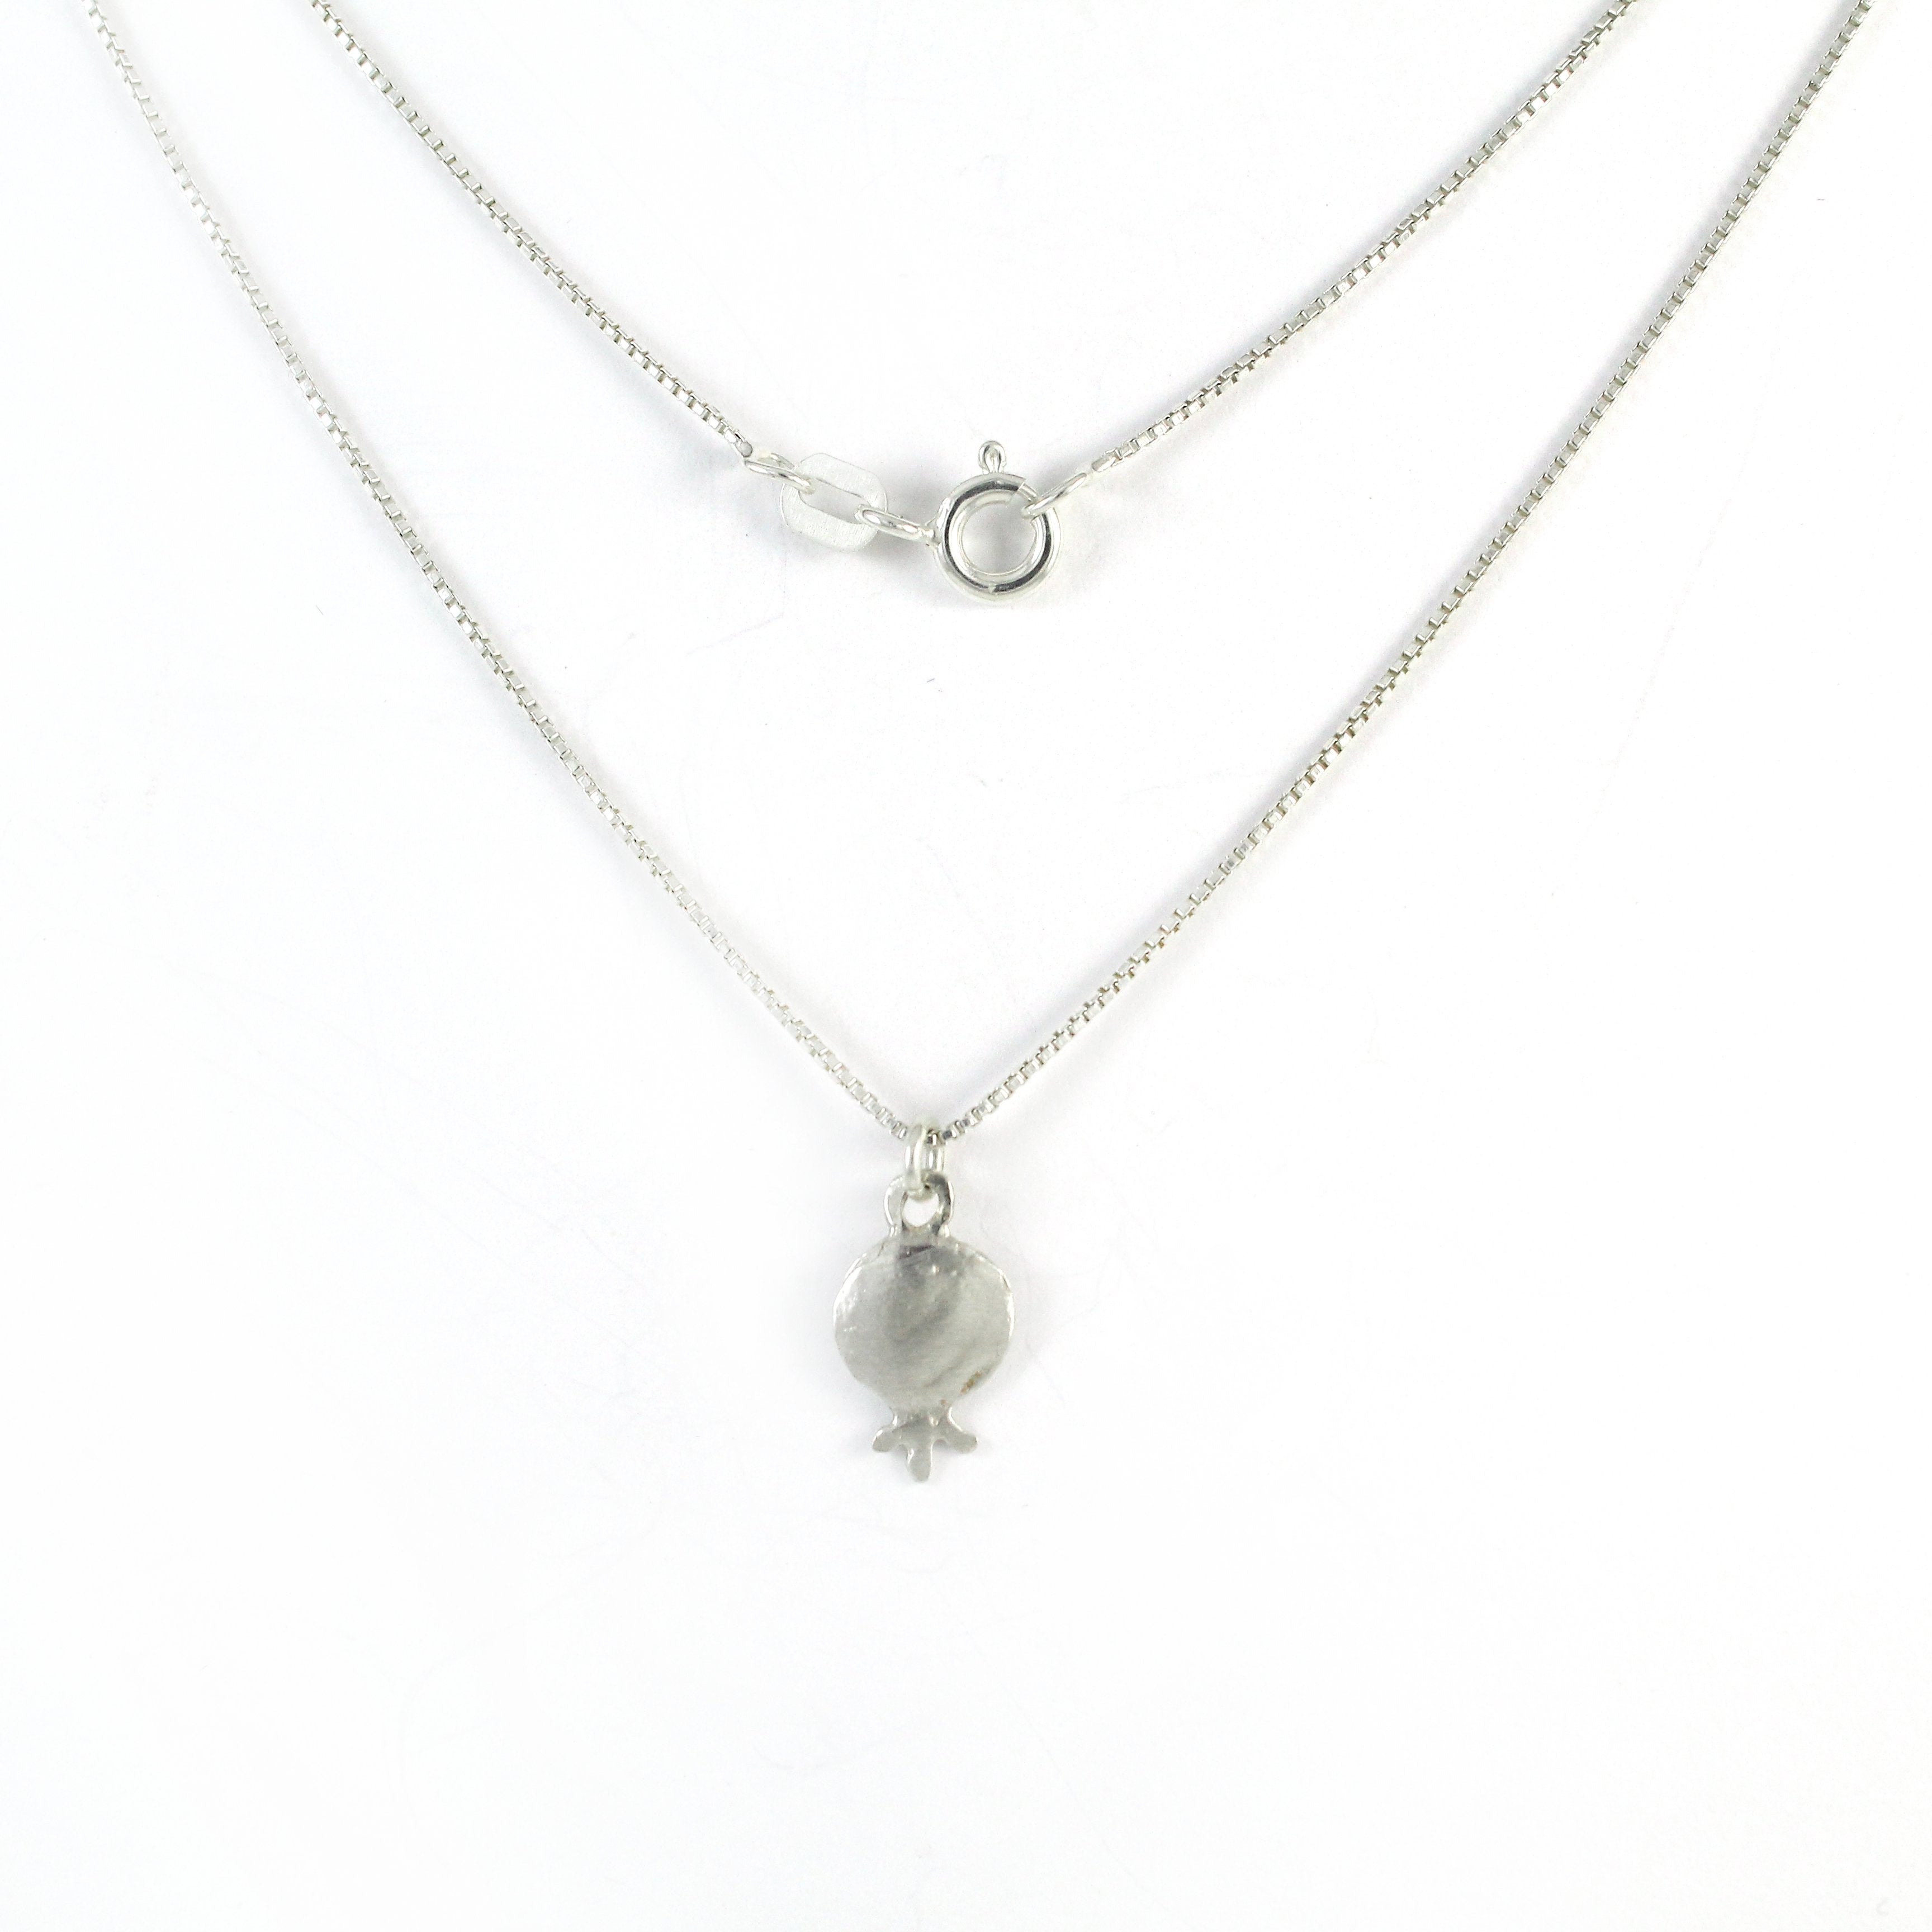 Small Pomegranate Silver Necklace - Shulamit Kanter